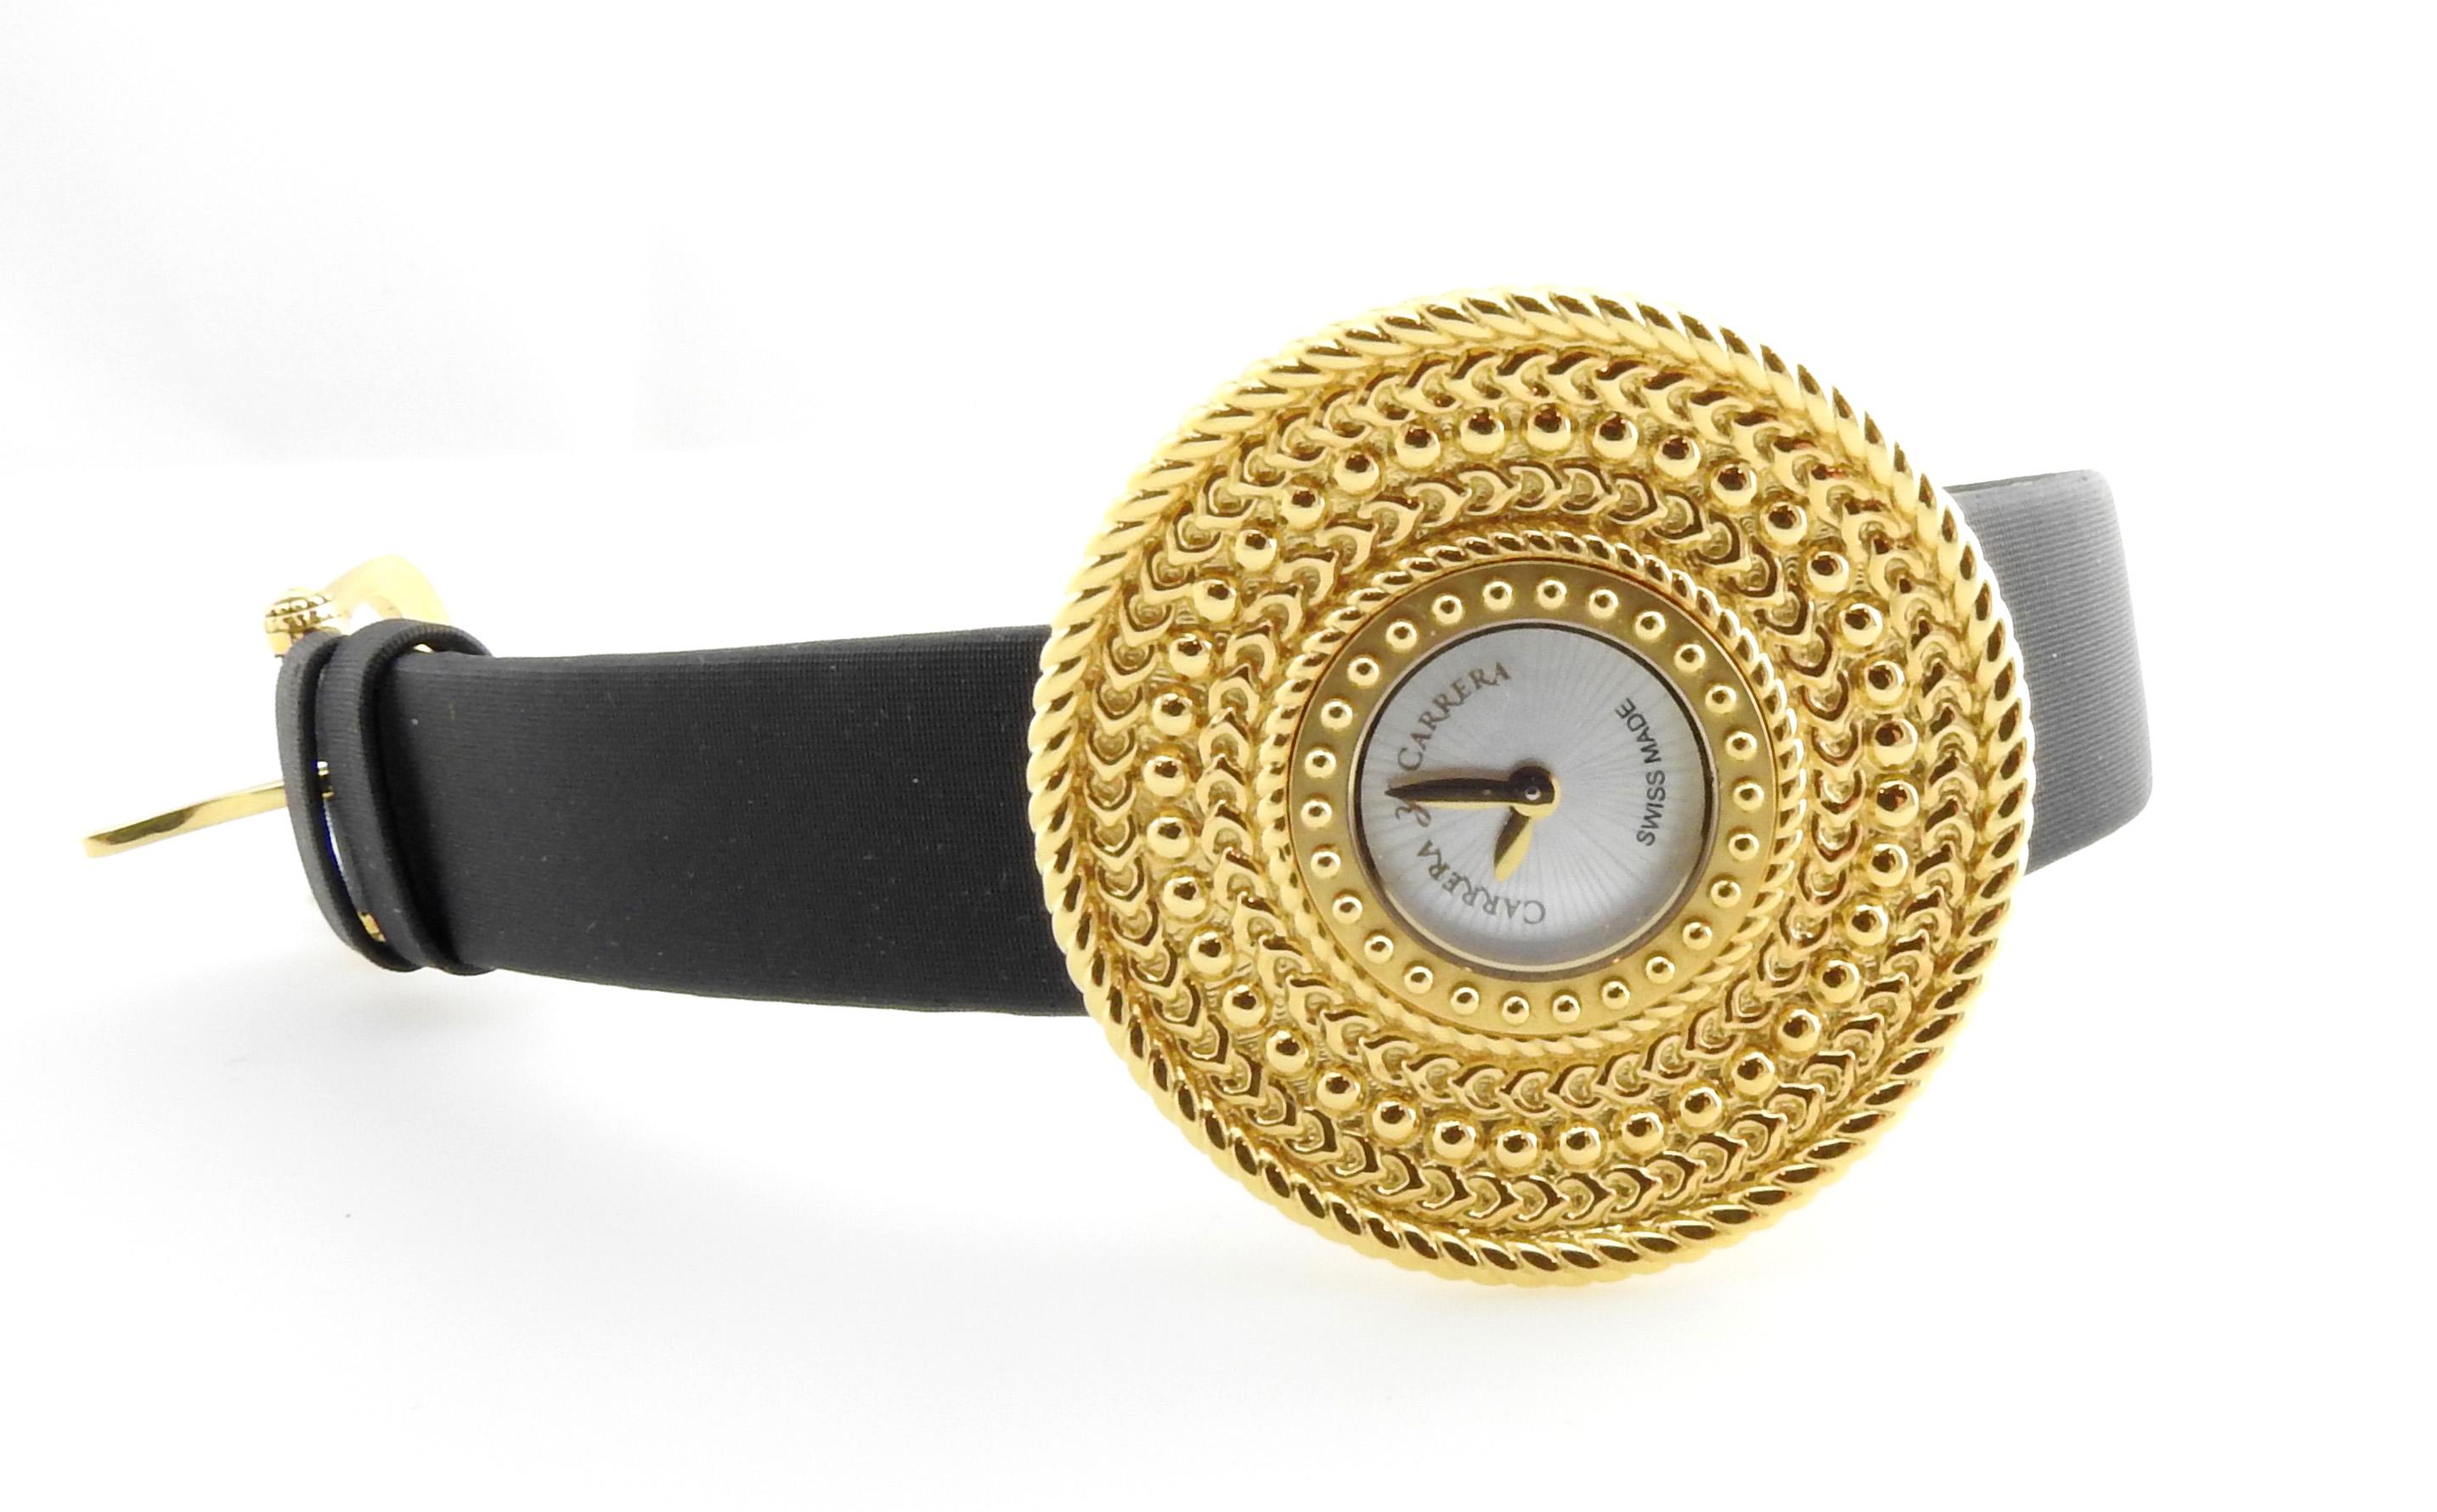 Carrera Y Carrera 18K Yellow Gold Abstract Circle Beaded Ladies Watch

Mother of Pearl Dial marked Carrera Y Carrera Swiss Made

Dial is approx. 35.5 mm in diameter and 8.75mm thick

Model # 1000/00070

Watch still has tag on 

Quartz